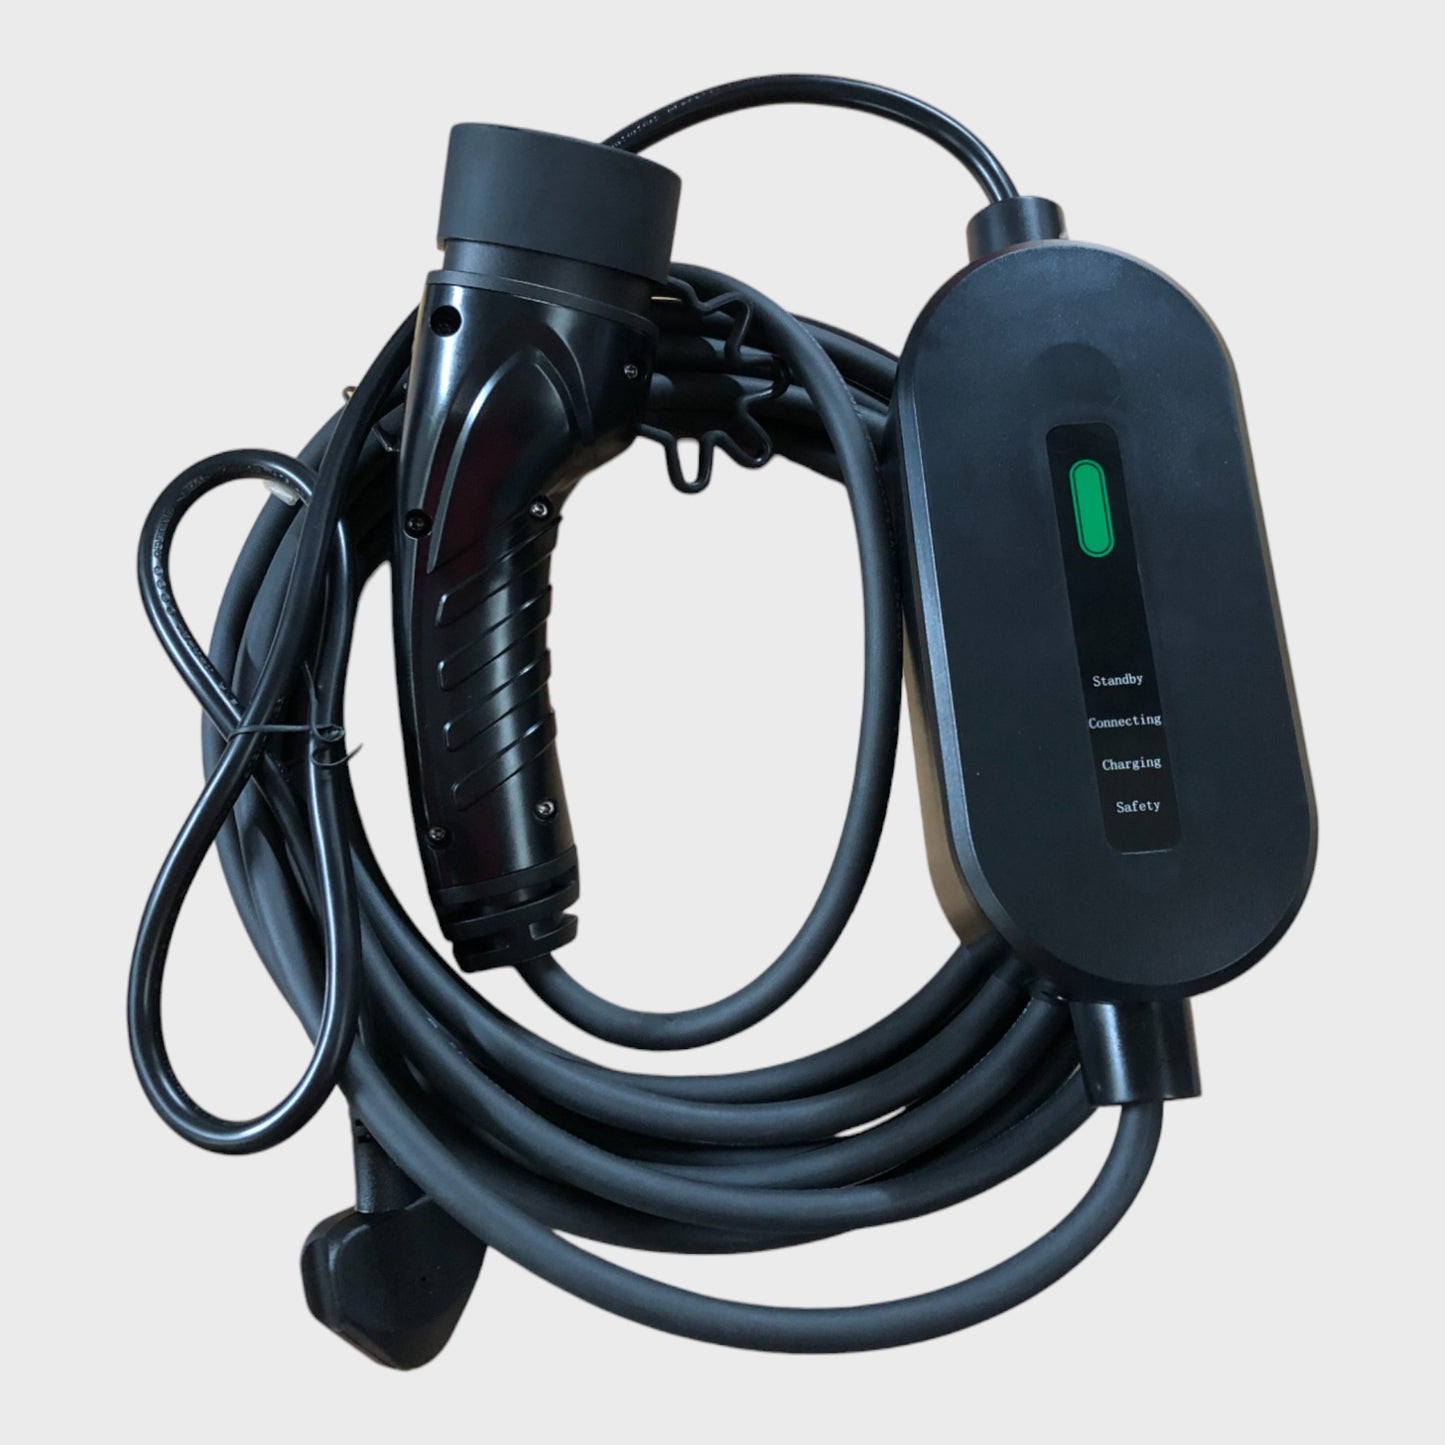 Mode 2 Electric Vehicle Charger